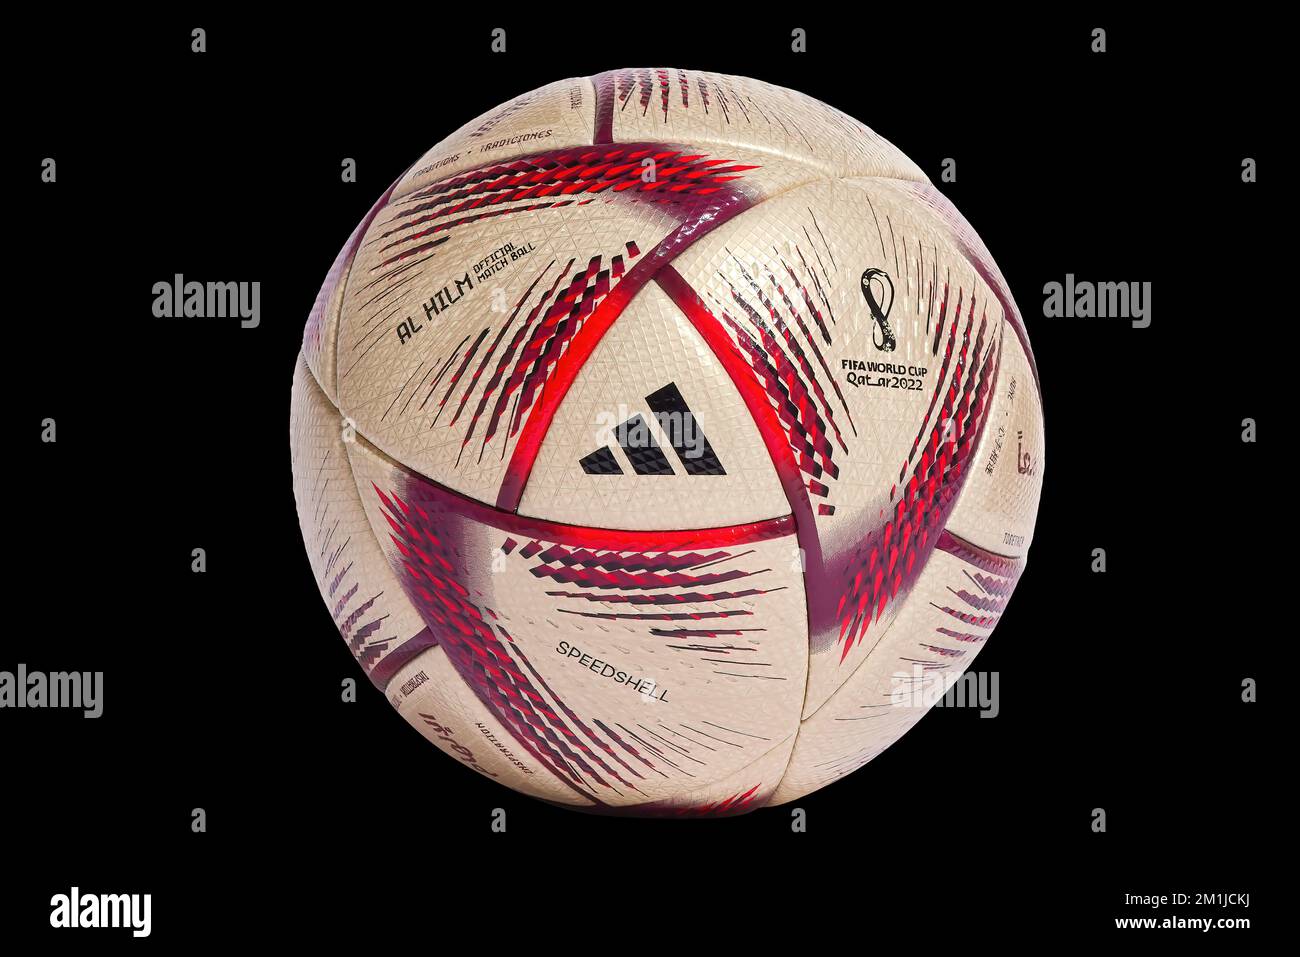 Lusail, Qatar. Dec 11, 2022. An Adidas Al Hilm Pro Soccer ball. An official match ball used in the FIFA World Cup semi-finals and final matches games. Stock Photo